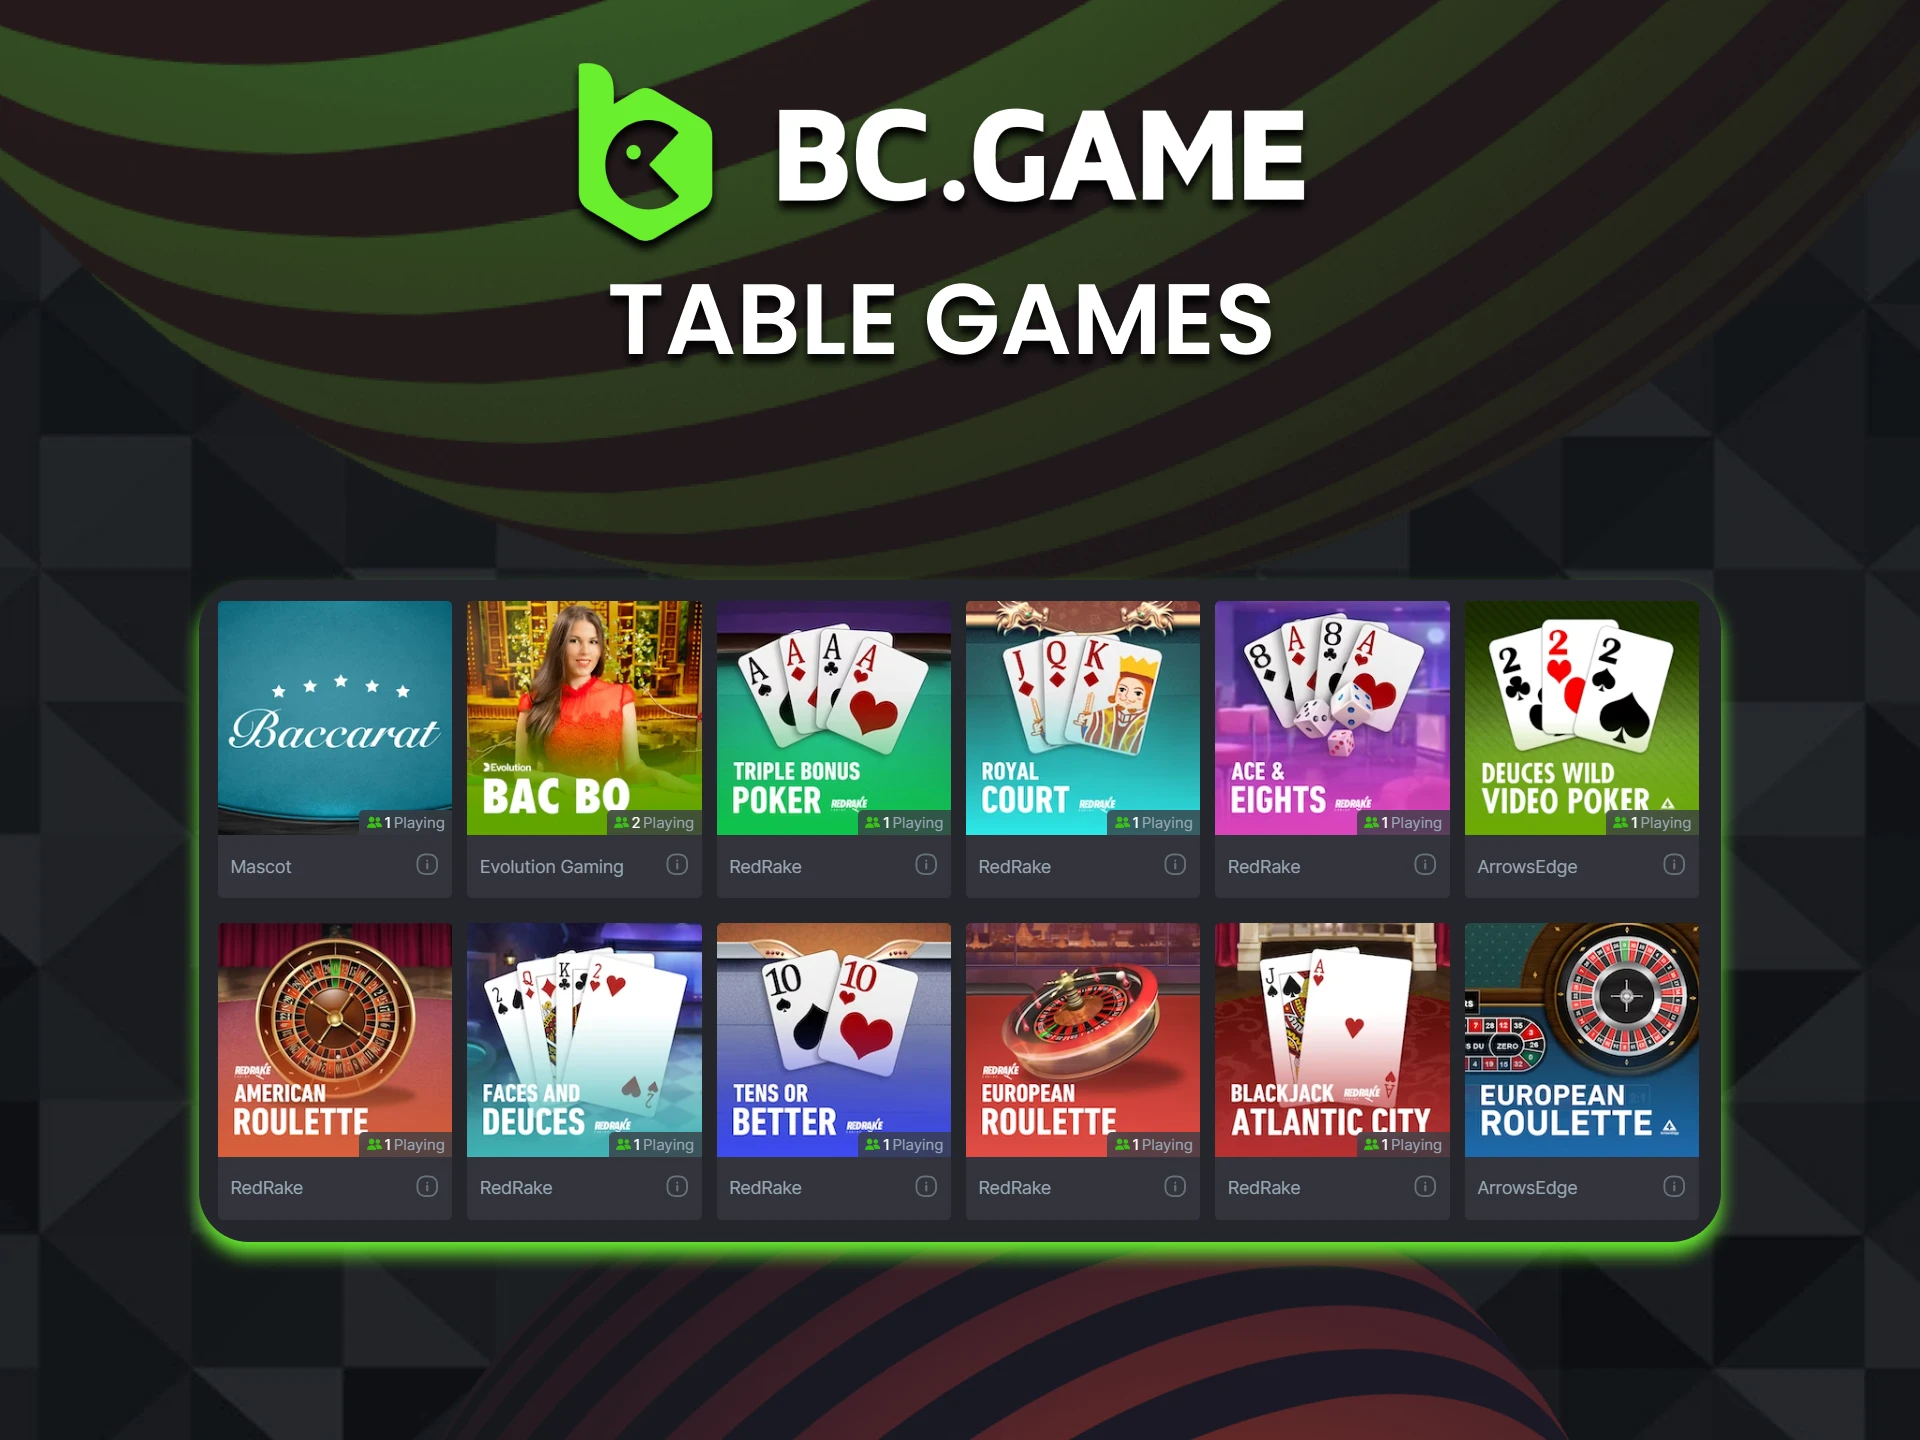 For casino games on BC Game, choose the Table Games section.